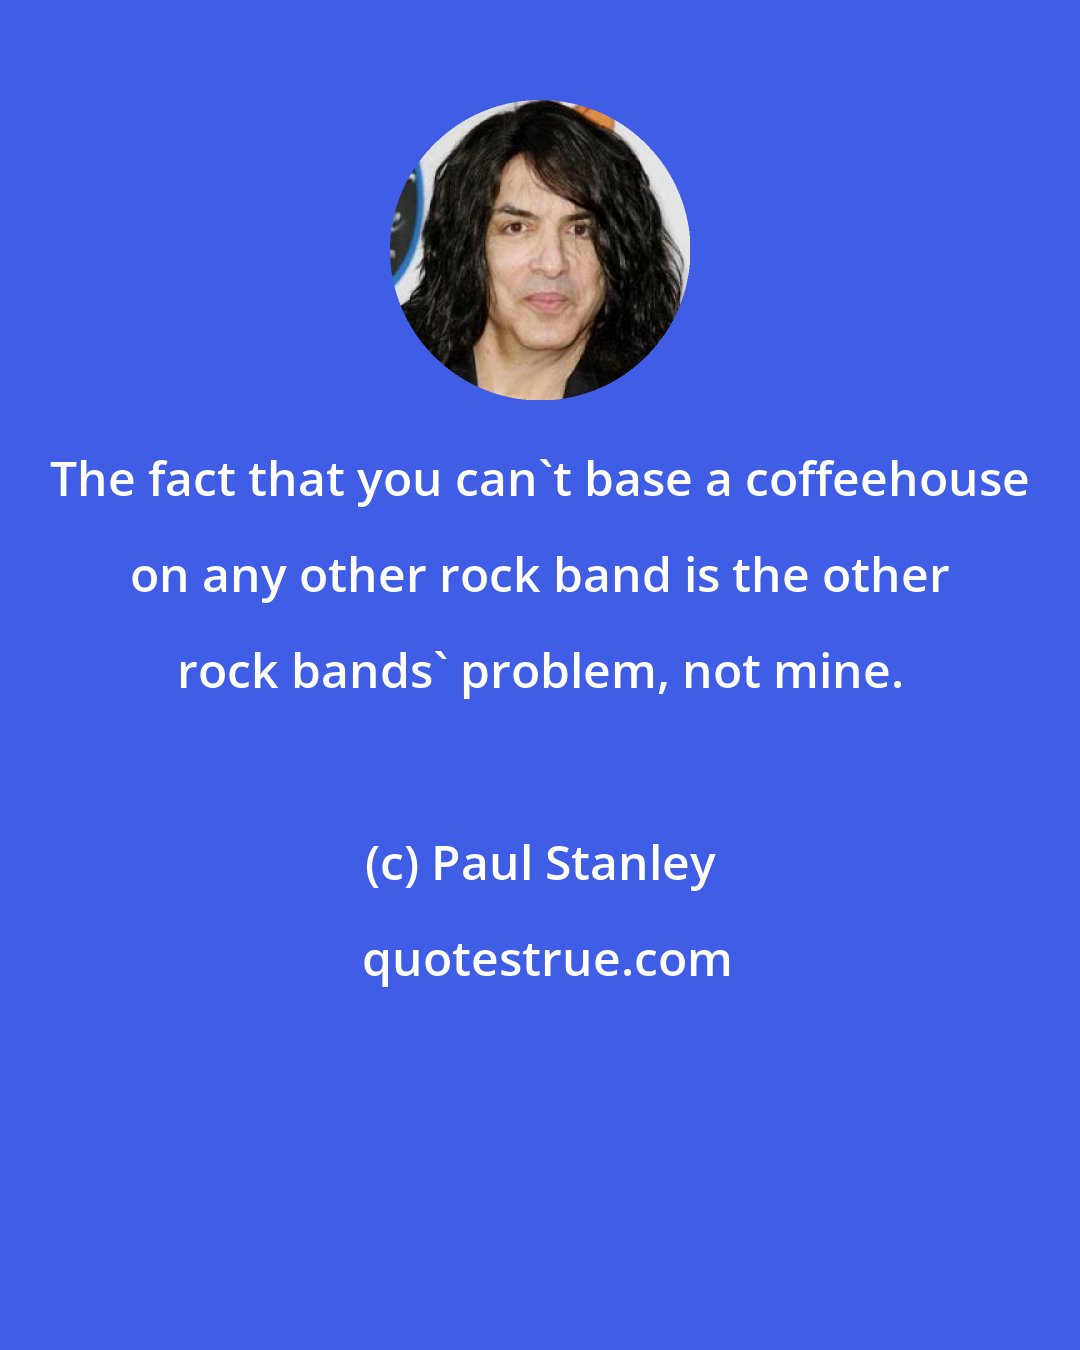 Paul Stanley: The fact that you can't base a coffeehouse on any other rock band is the other rock bands' problem, not mine.